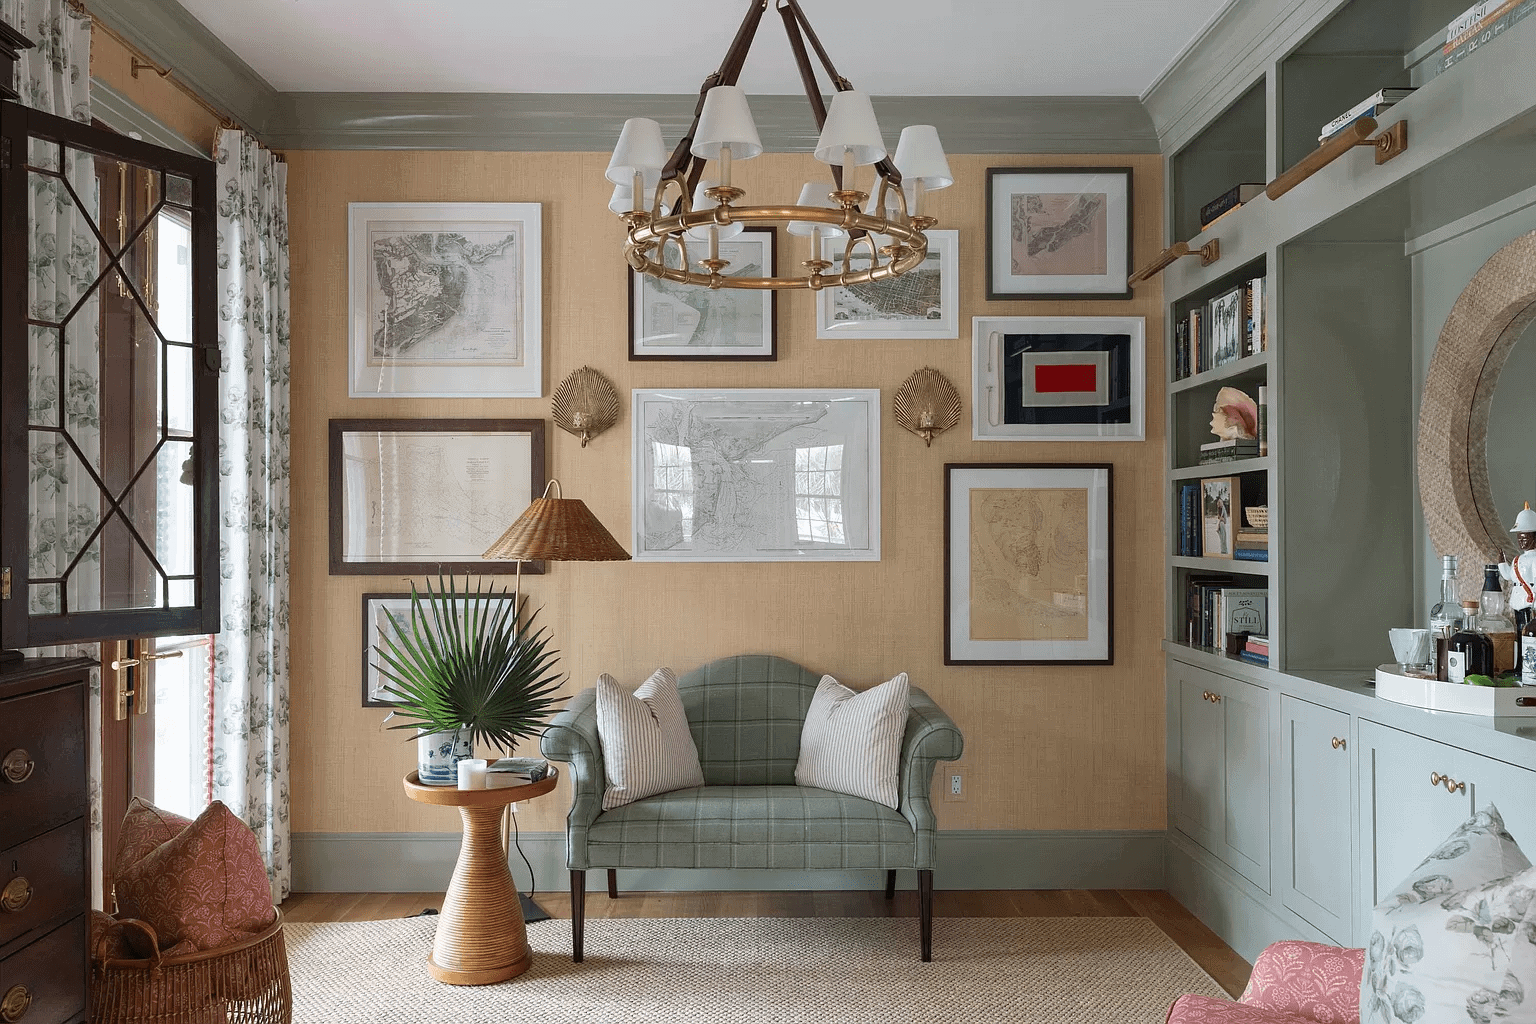 Home tour featuring Charleston Harbor home with traditional decor